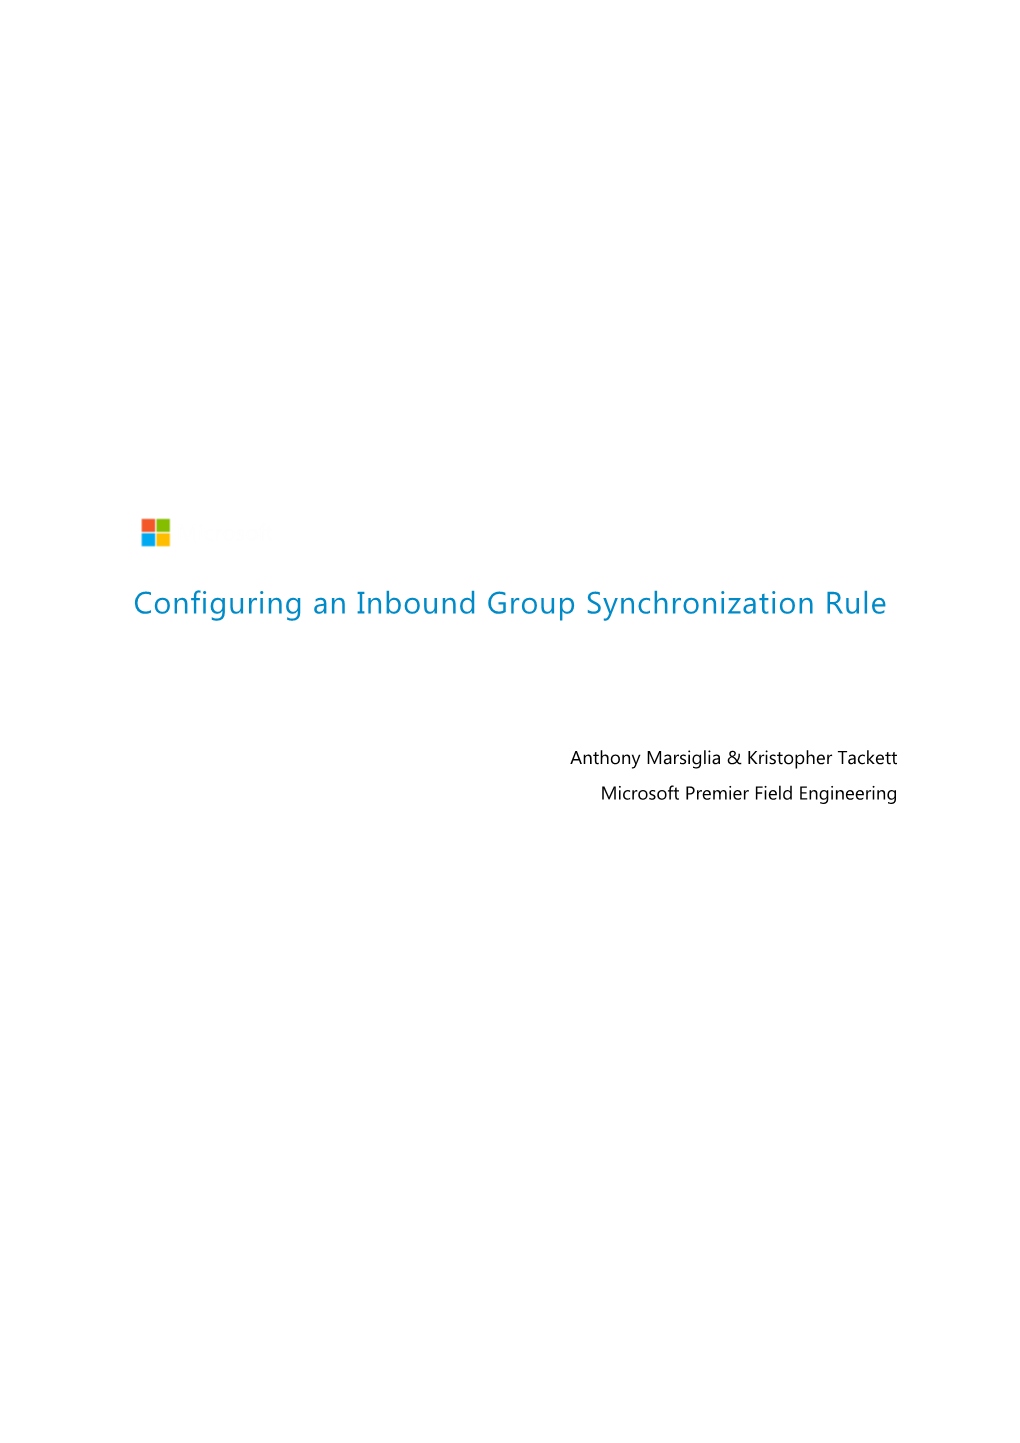 Configuring an Inbound Group Synchronization Rule